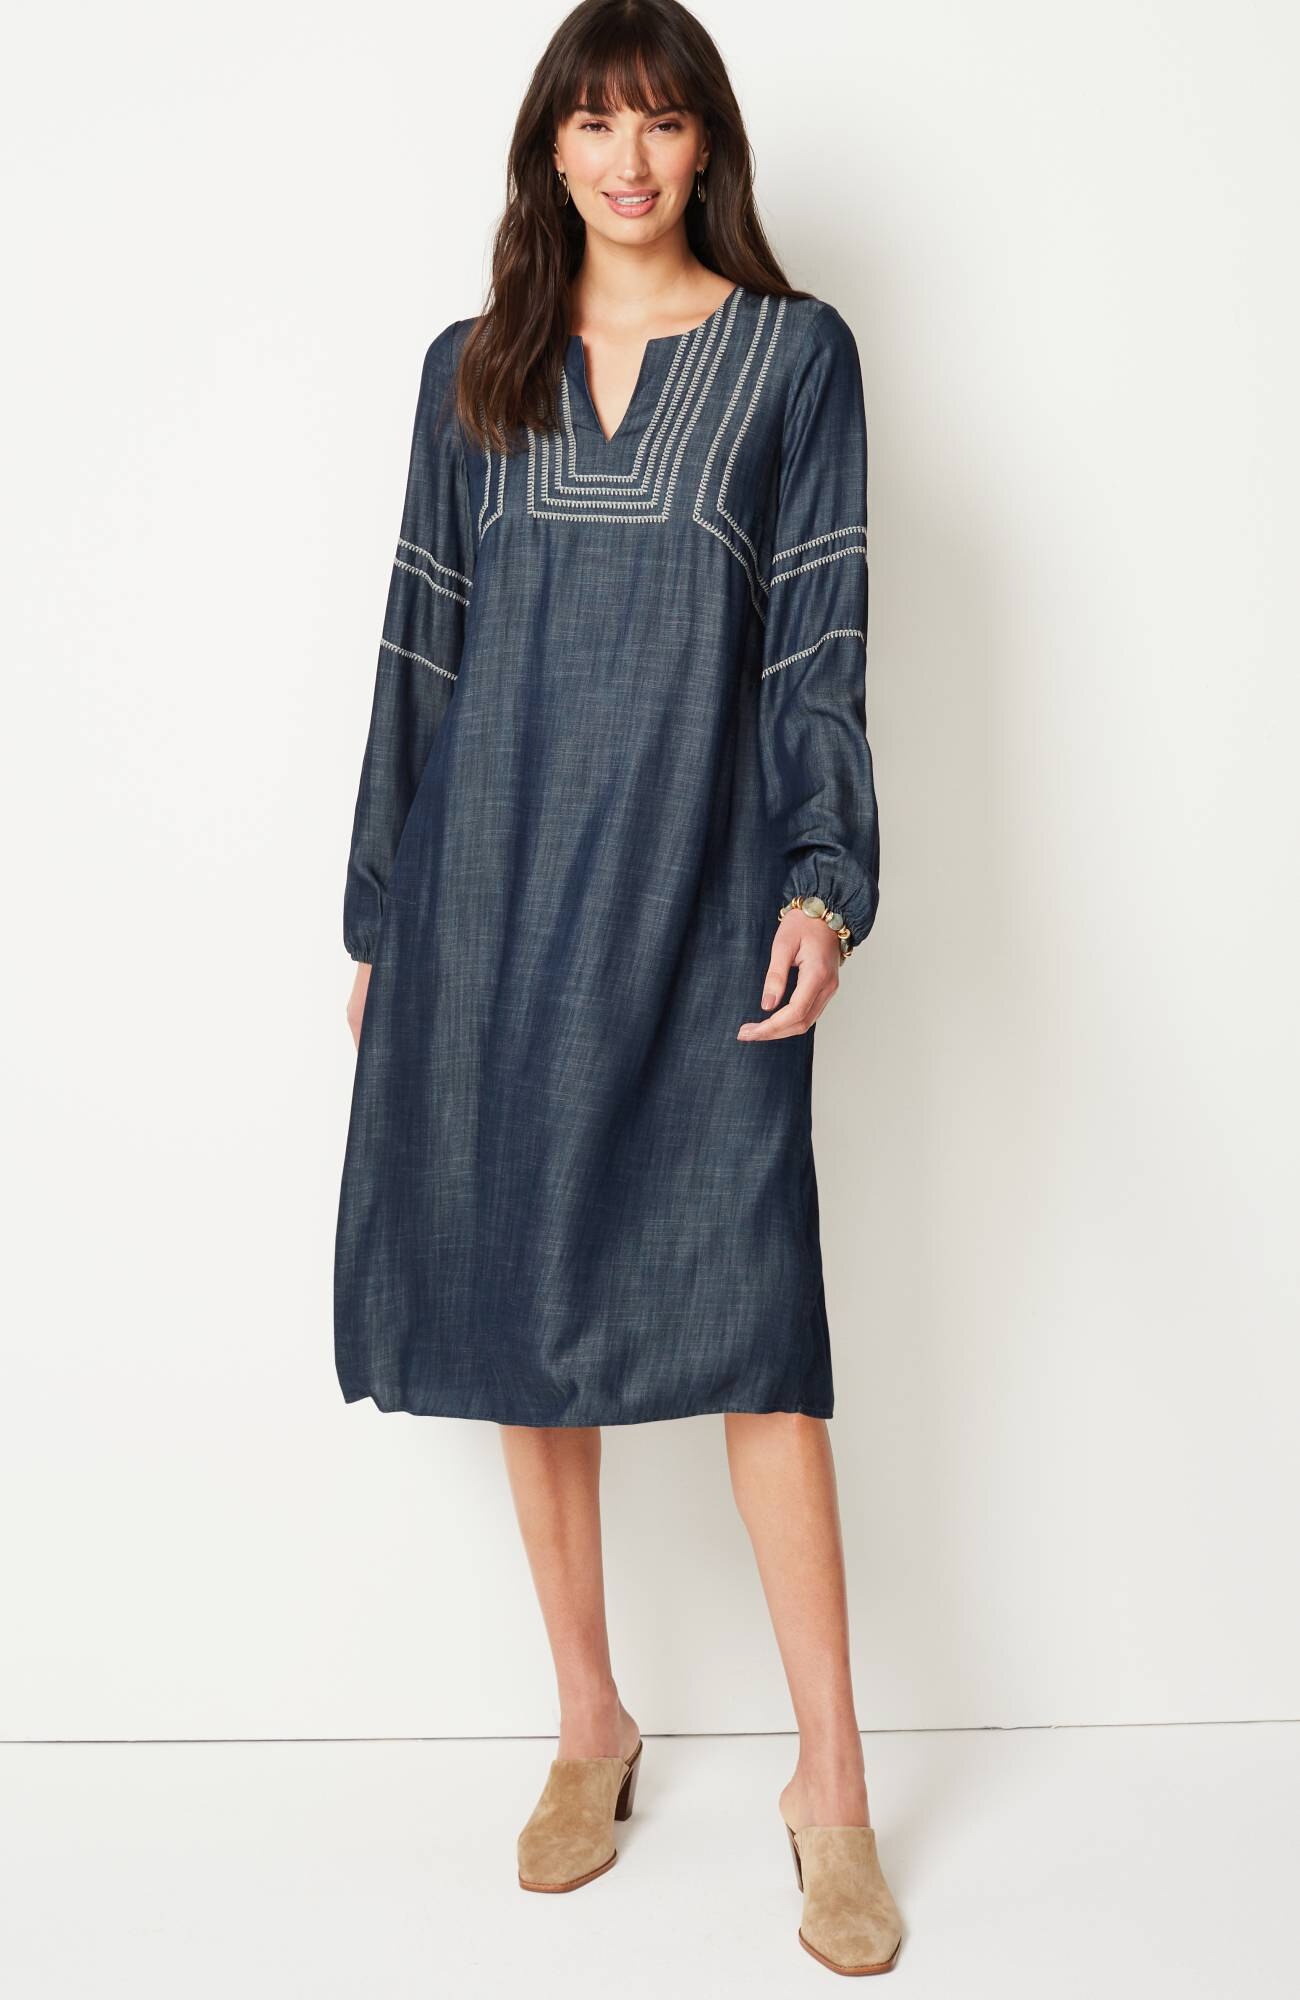 Pure Jill Whipstitched Embroidered Dress